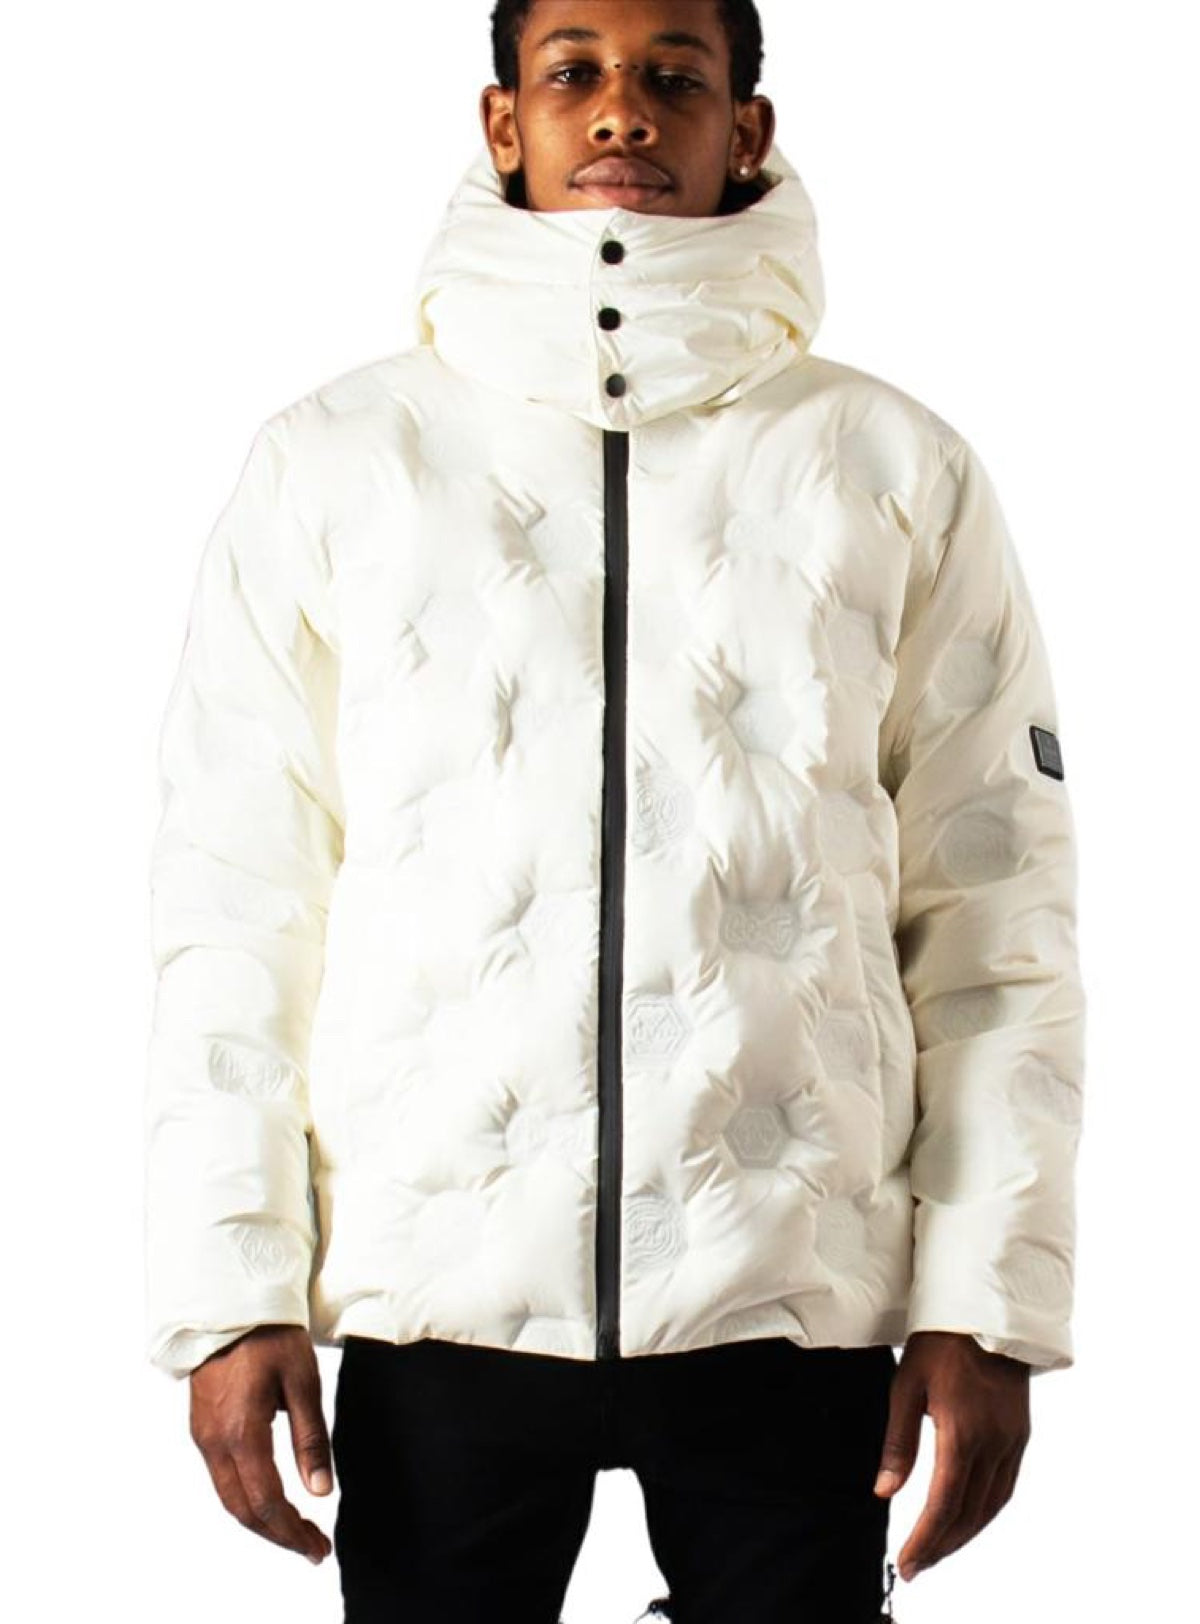 Puffer Jackets in Good Quality - Deals Vengeance78 Store